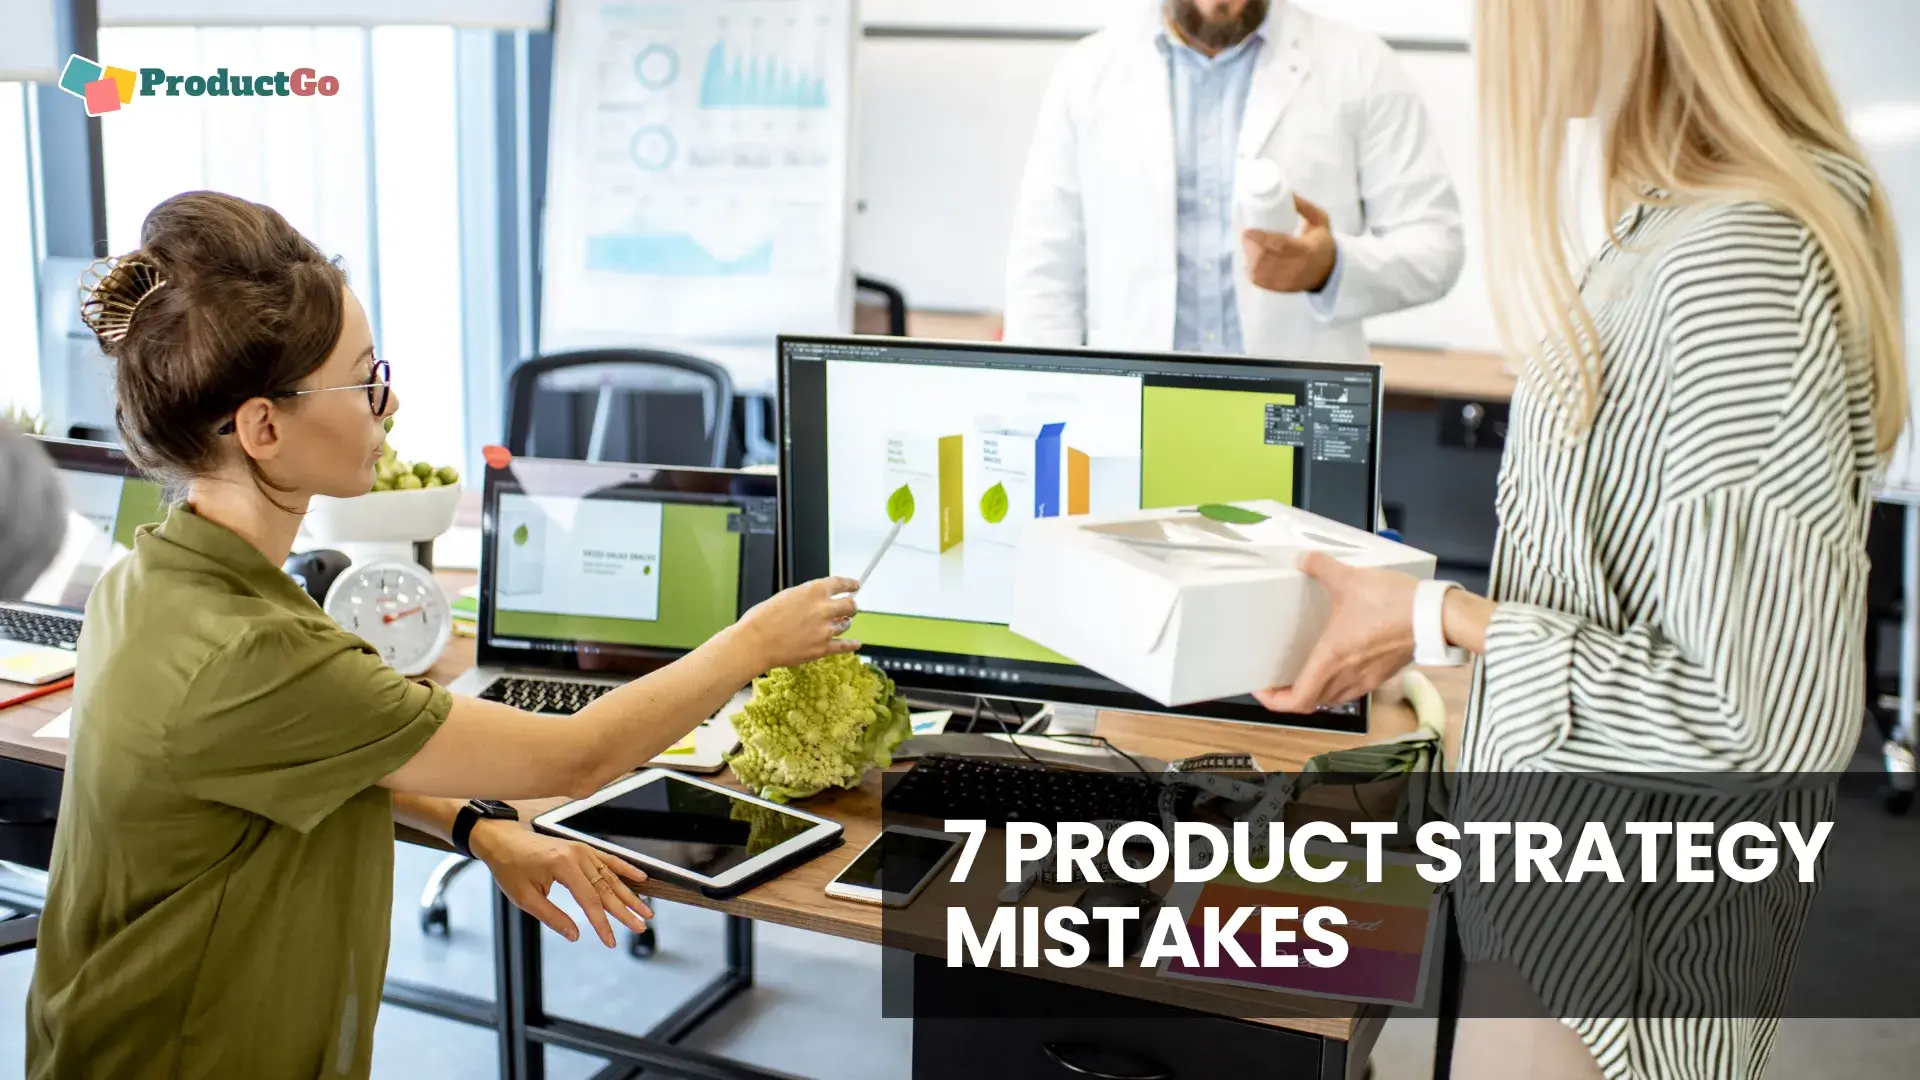 productgo blog - product strategy mistakes